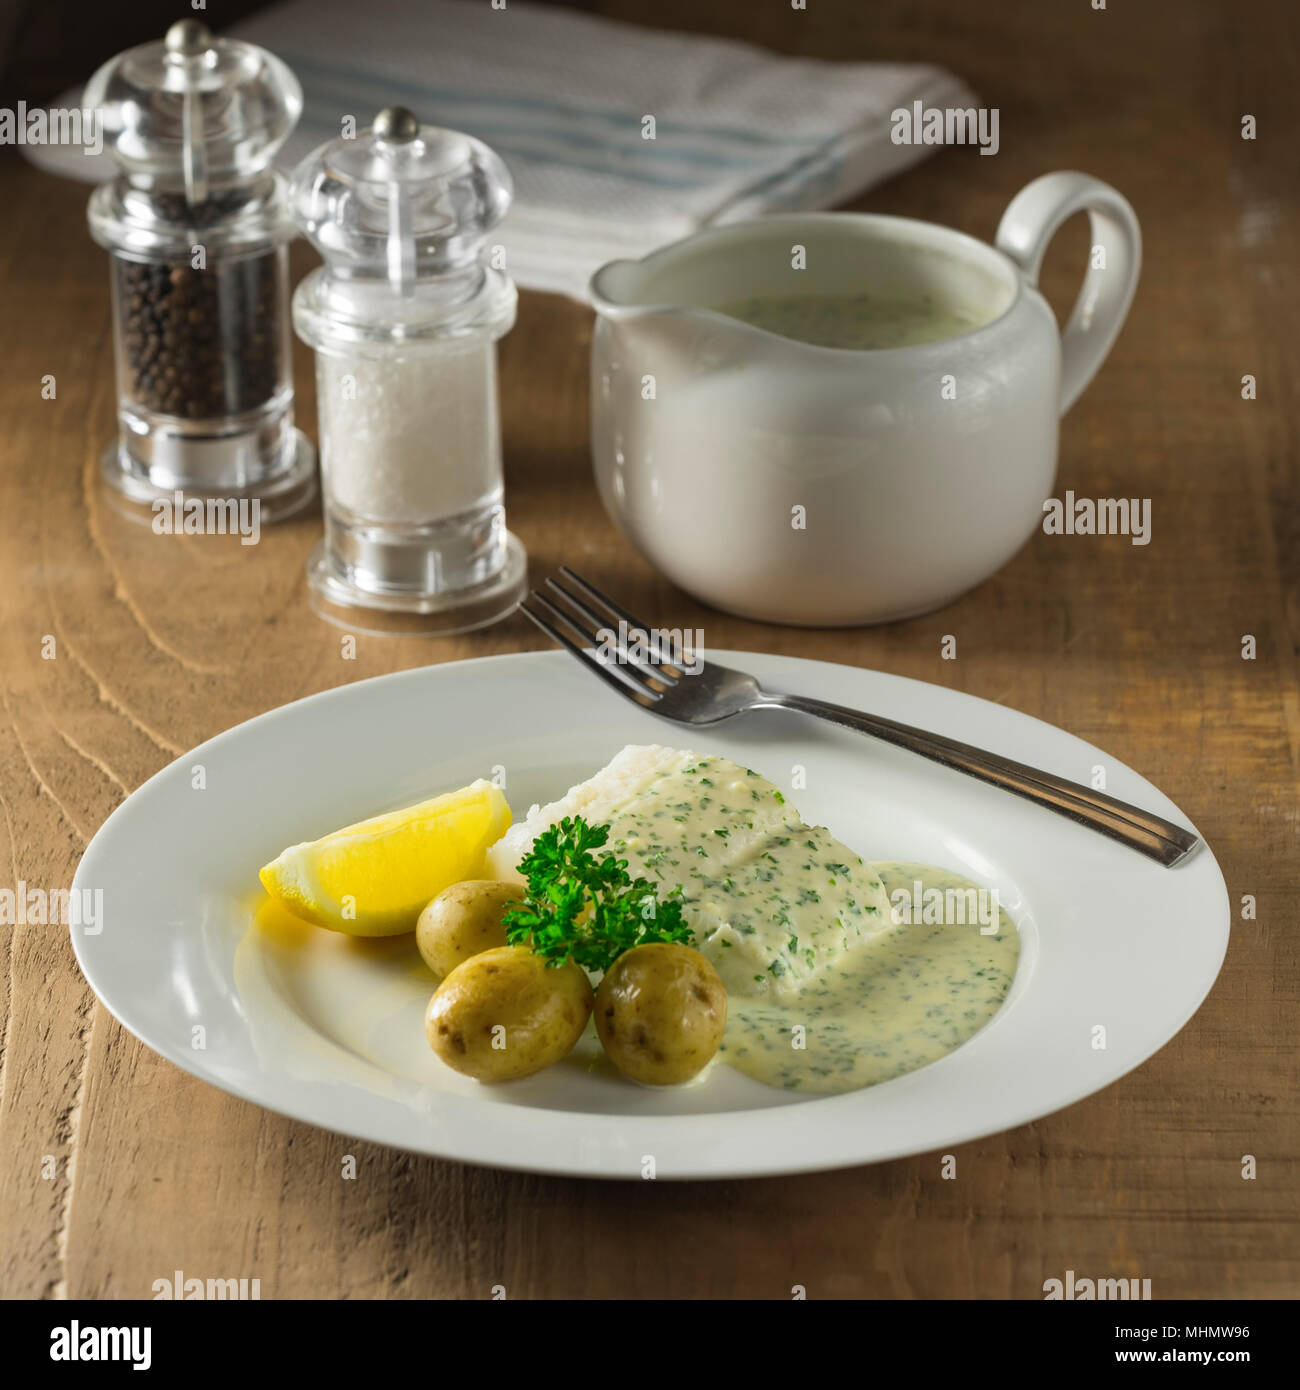 Cod in parsley sauce. Stock Photo